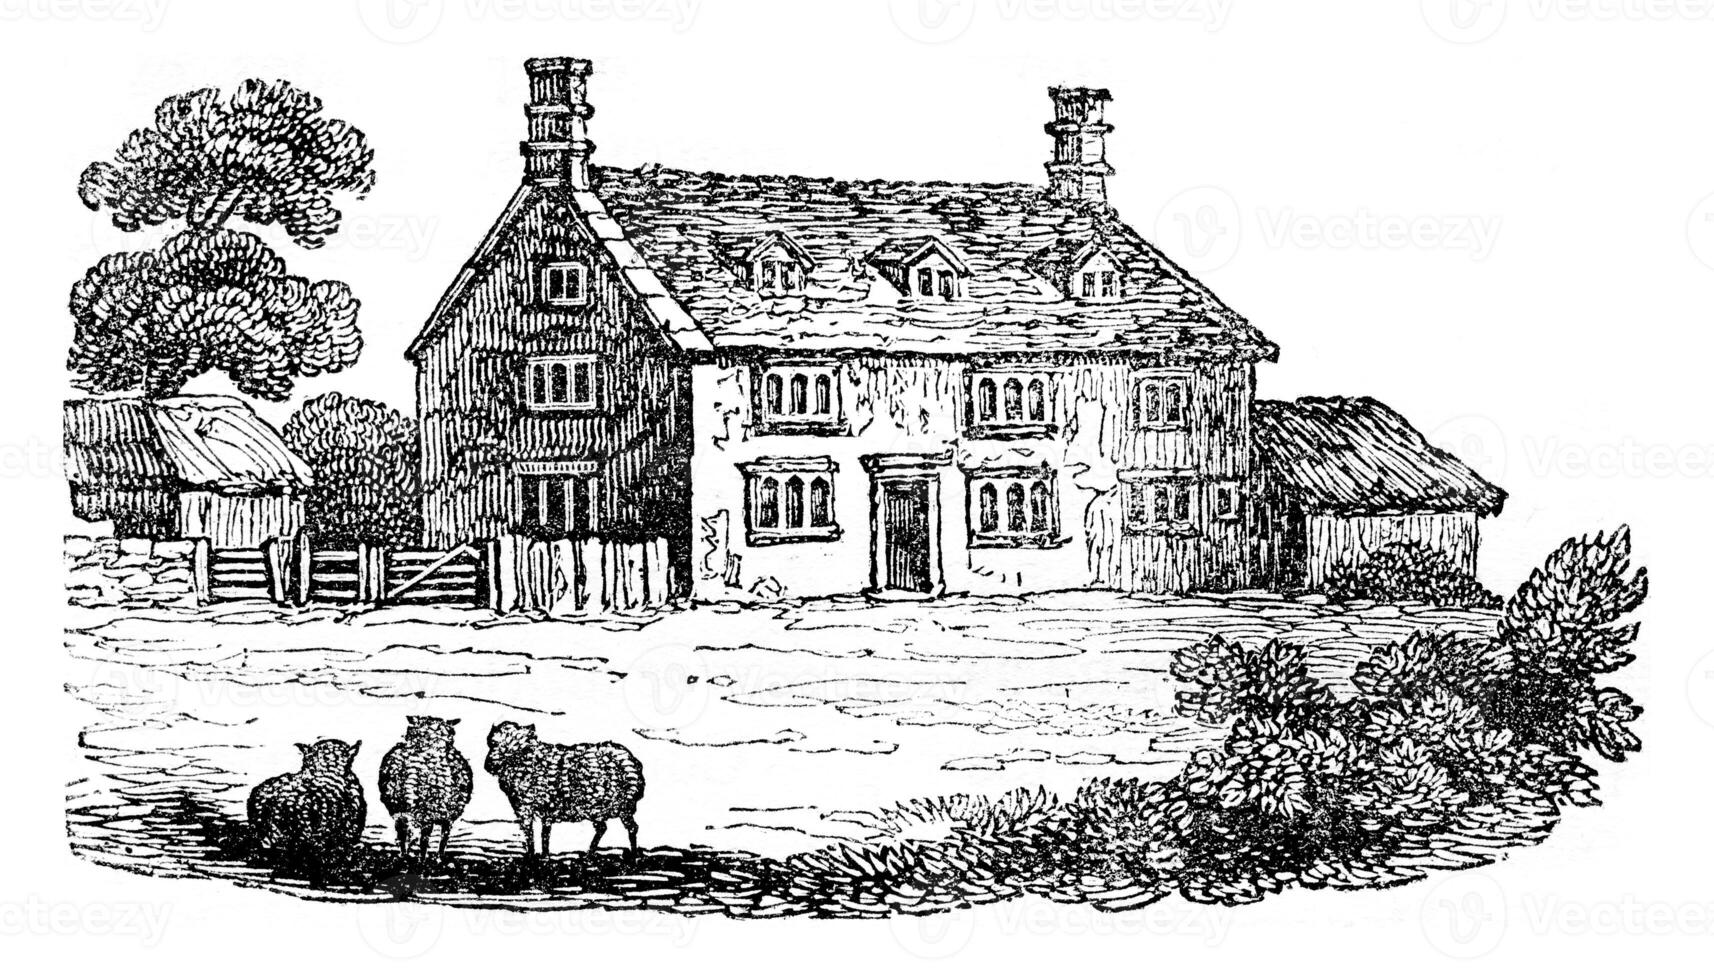 Home and Newton died in 1727, vintage engraving. photo